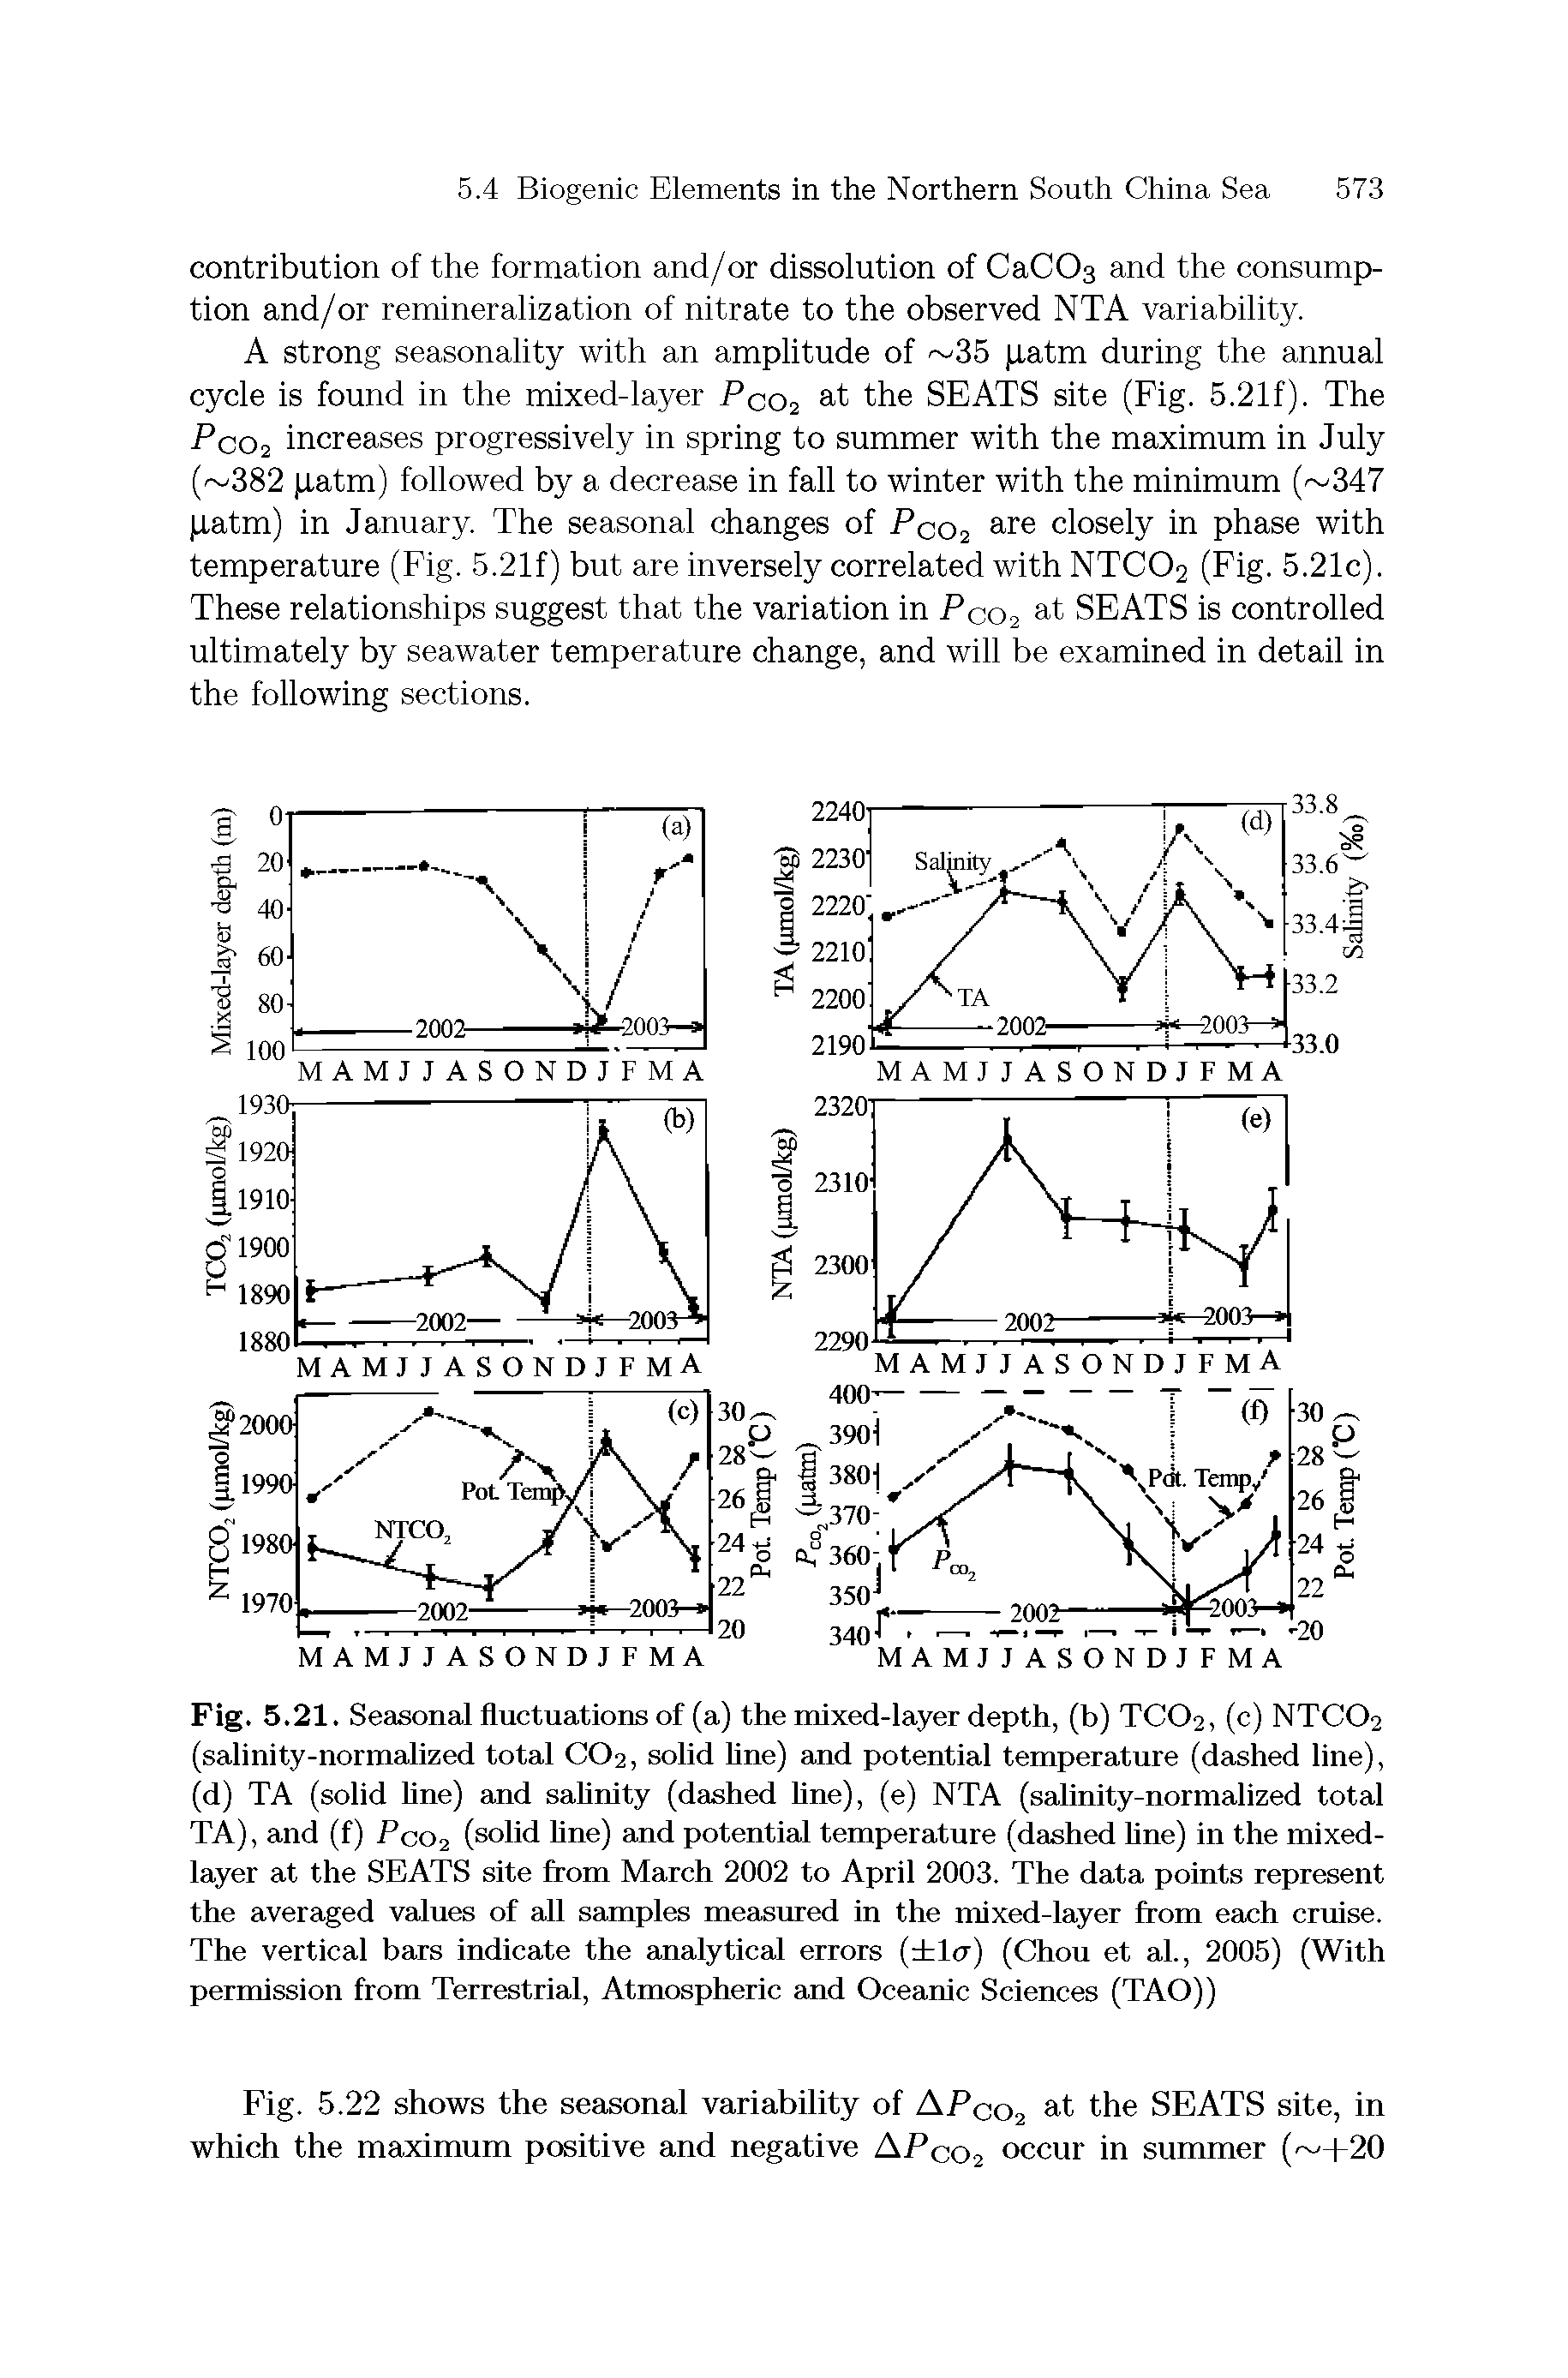 Fig. 5.21. Seasonal fluctuations of (a) the mixed-layer depth, (b) TCO2, (c) NTCO2 (salinity-normalized total CO2, solid Une) and potential temperatinre (dashed line), (d) TA (solid hne) and salinity (dashed Une), (e) NTA (sahnity-normalized total TA), and (f) Fcoa (solid hne) and potential temperature (dashed hne) in the mixed-layer at the SEATS site from March 2002 to April 2003. The data points represent the averaged values of all samples measured in the mixed-layer from each cruise. The vertical bars indicate the analytical errors ( l<r) (Chou et al., 2005) (With permission from Terrestrial, Atmospheric and Oceanic Sciences (TAO))...